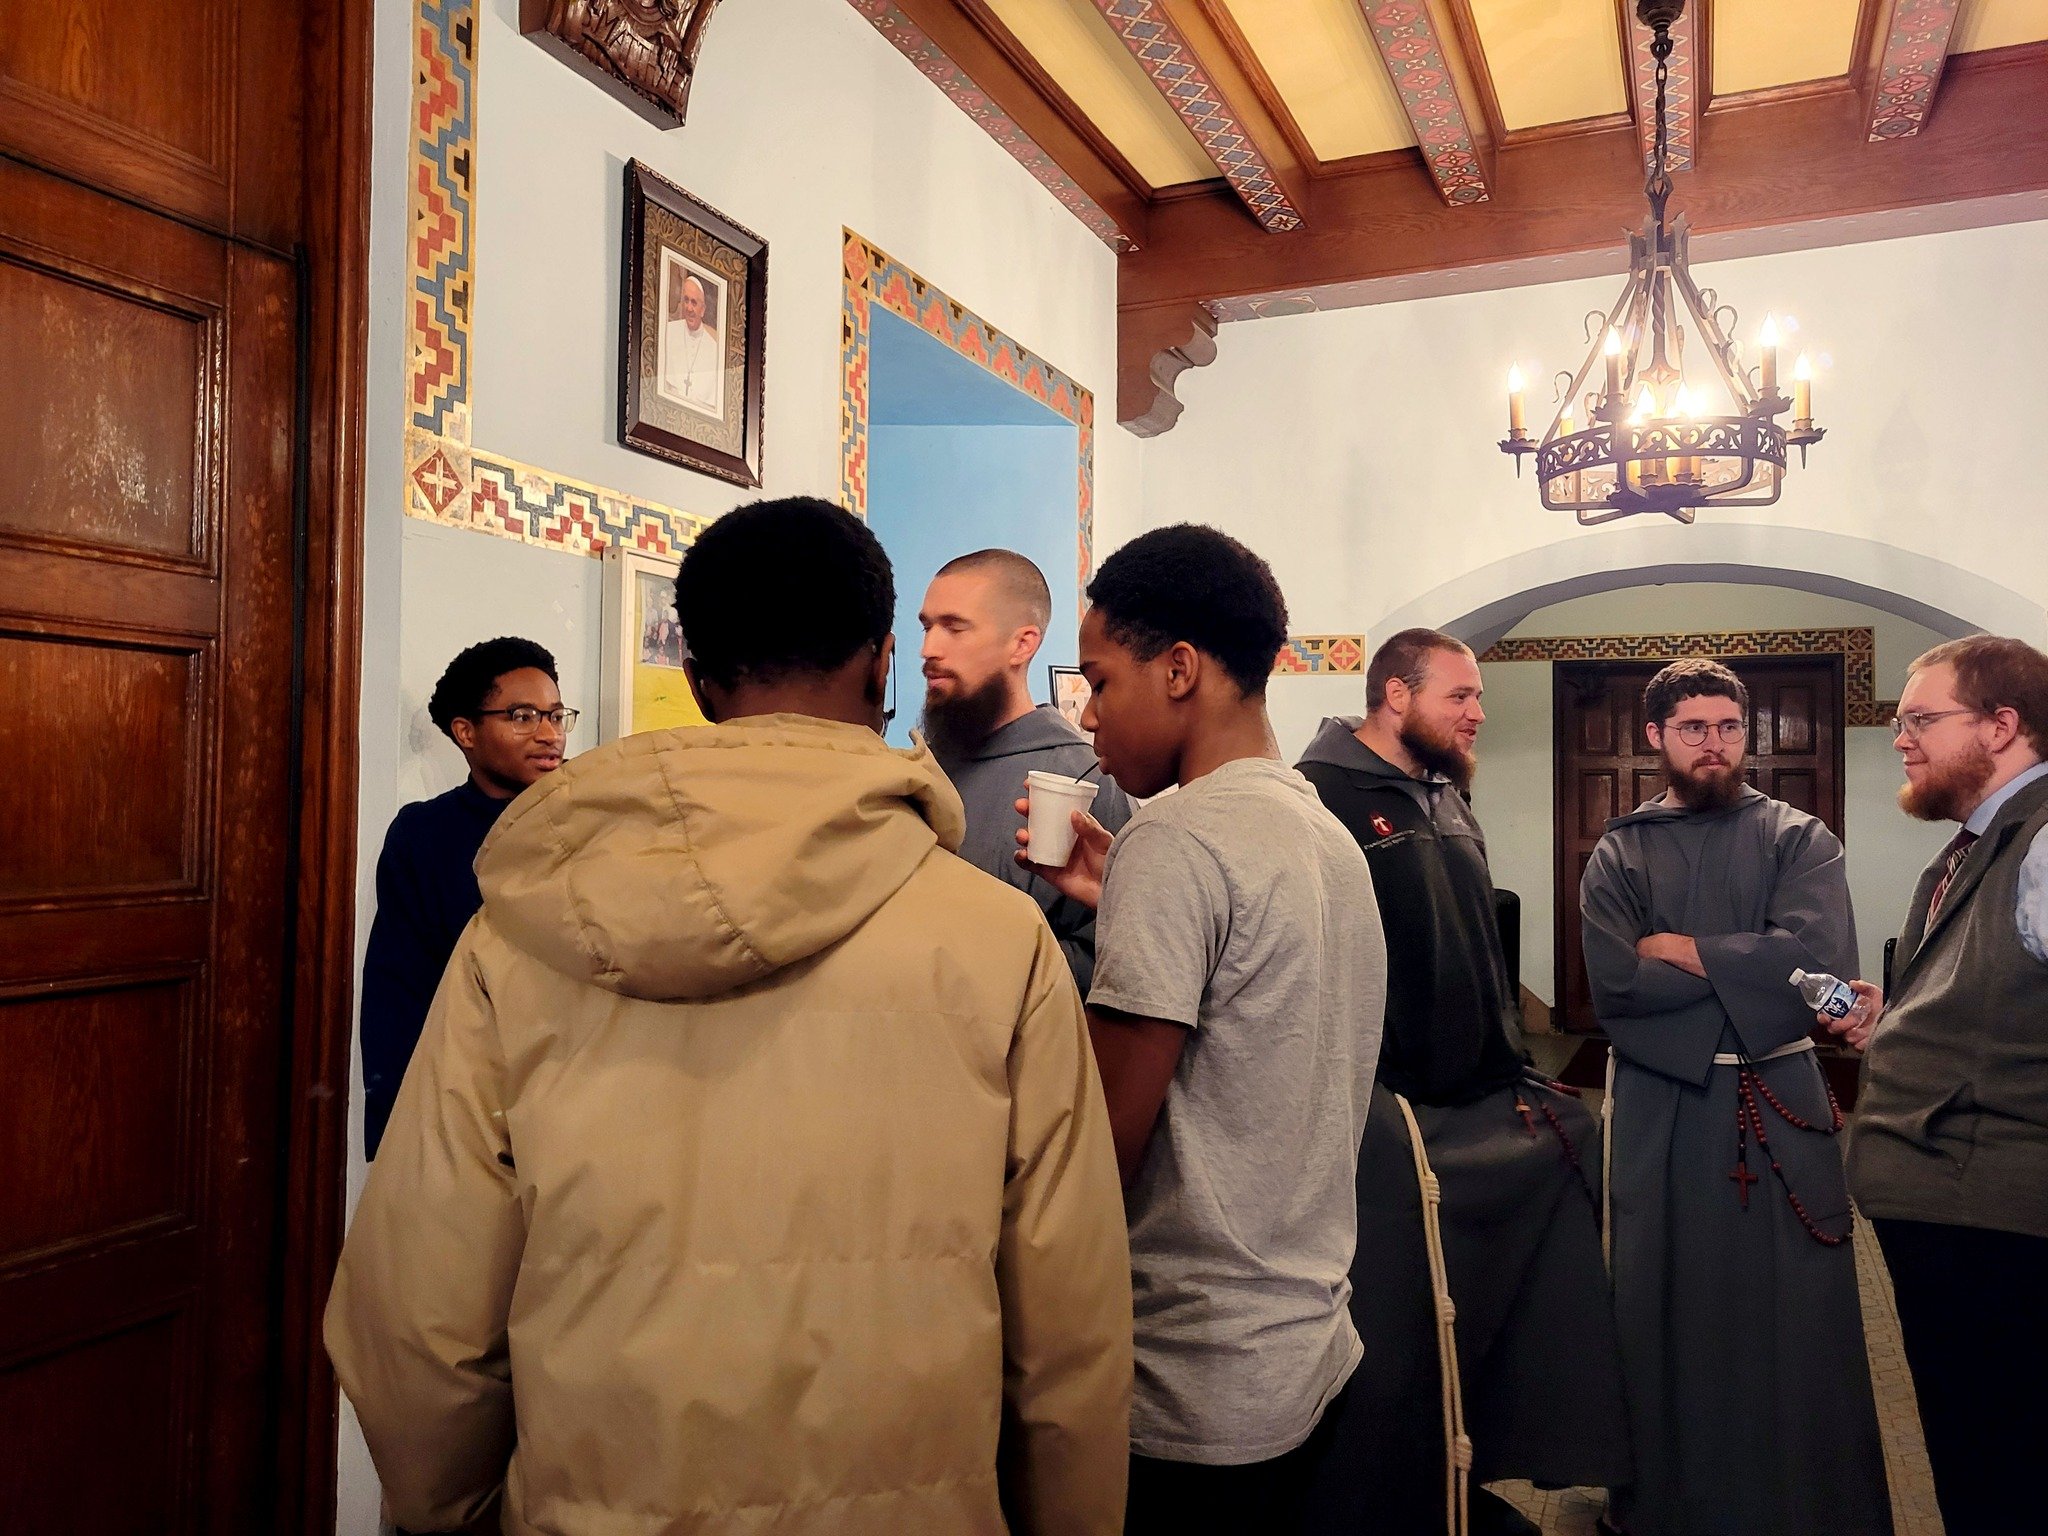 We had a SUPRISE VISIT last Sunday: the Franciscan Friars of the Holy Spirit! They stopped by to say 'goodbyes' before completing their move back to Arizona to continue the mission of the order. 

We are so incredibly thankful for the 4 years you ded